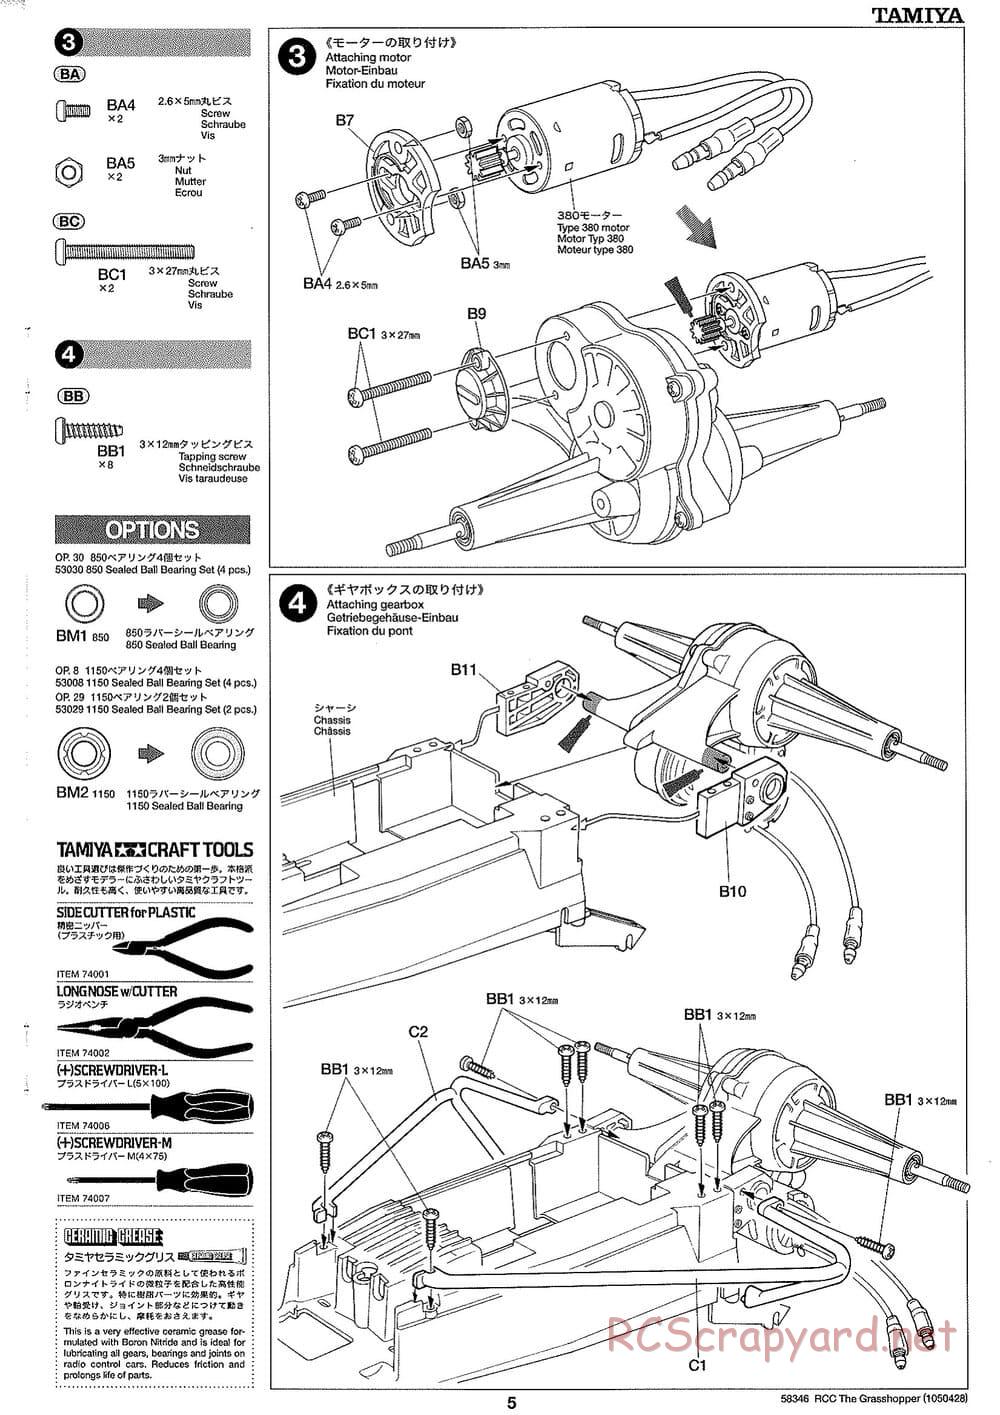 Tamiya - The Grasshopper (2005) - GH Chassis - Manual - Page 5